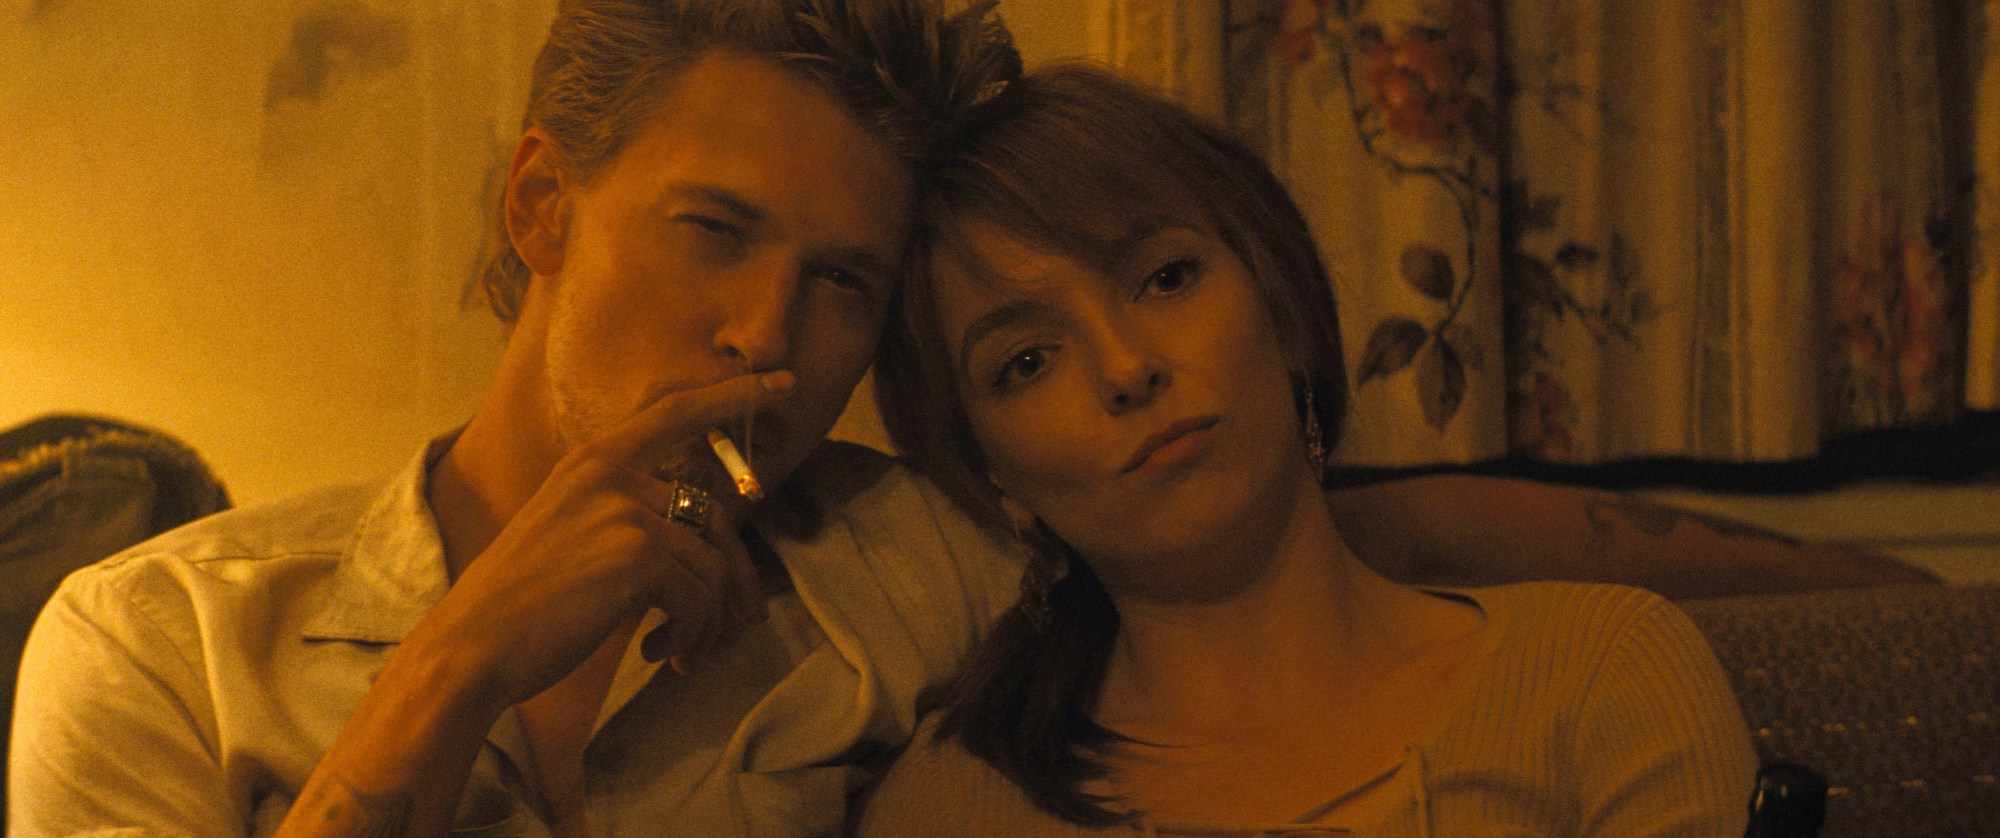 Austin Butler, as Benny, and Jodie Comer, as Kathy, share a scene in "The Bikeriders." (Courtesy of Focus Features)